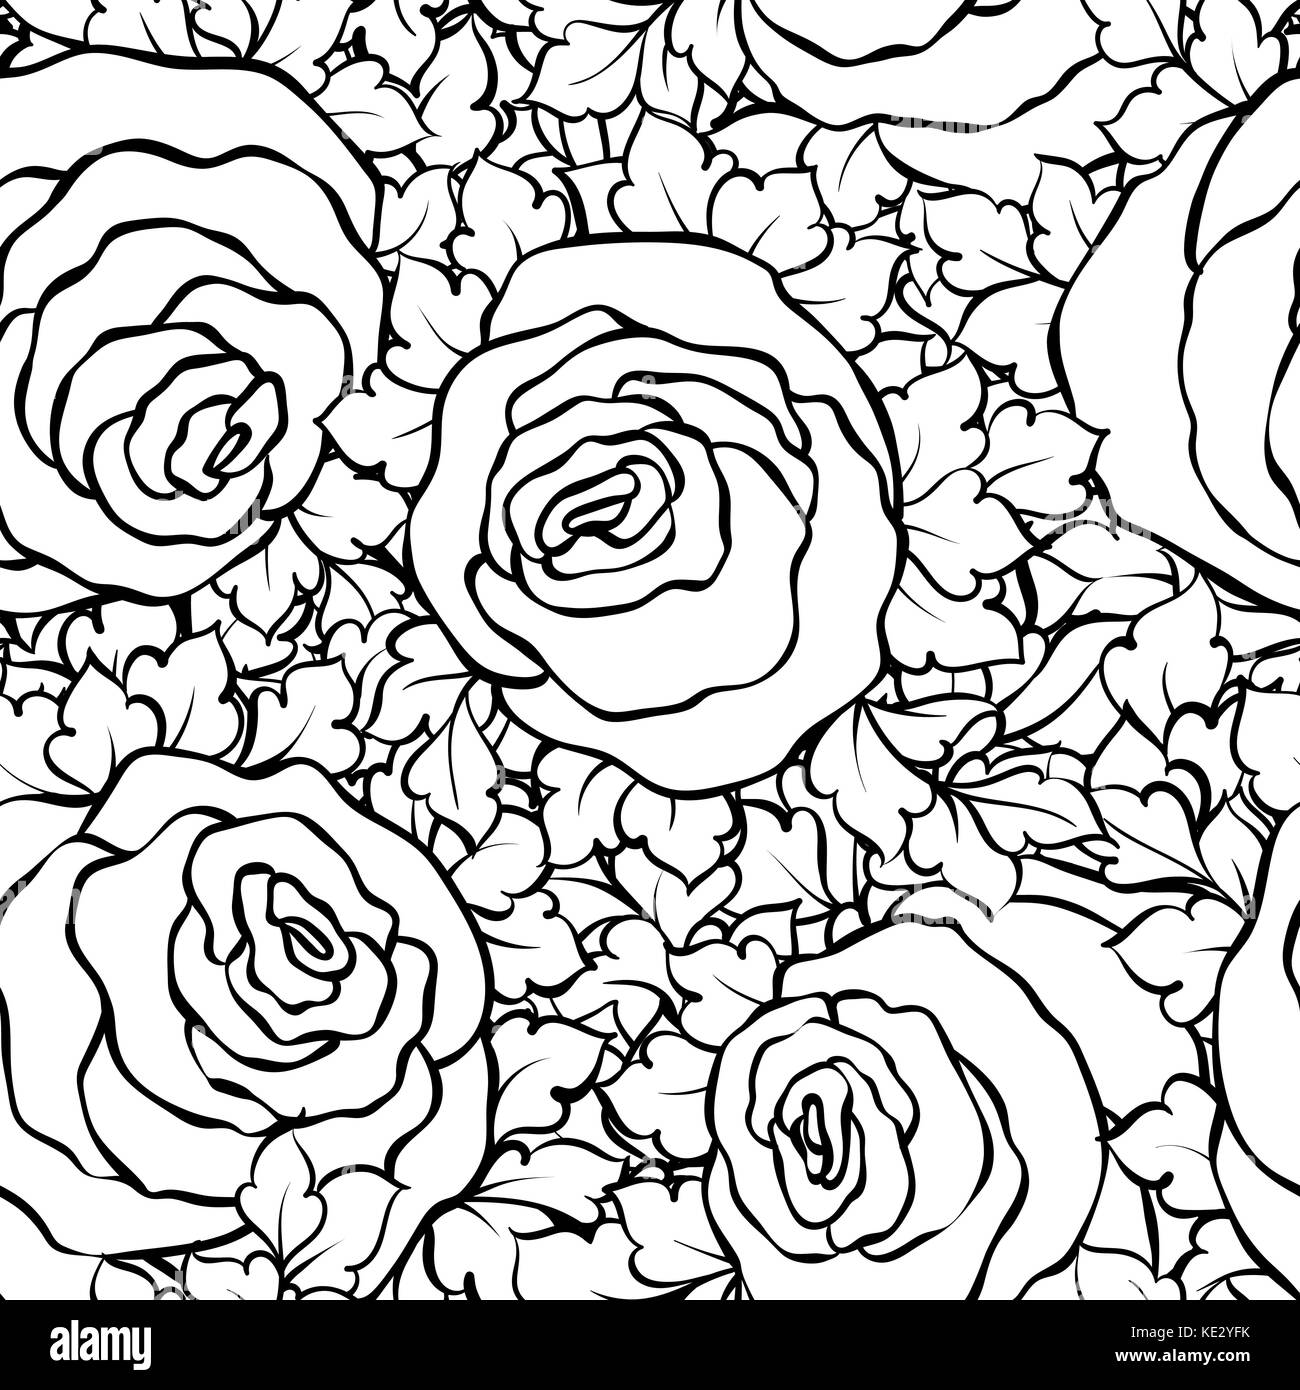 Floral decorative black and white background with cute roses ...